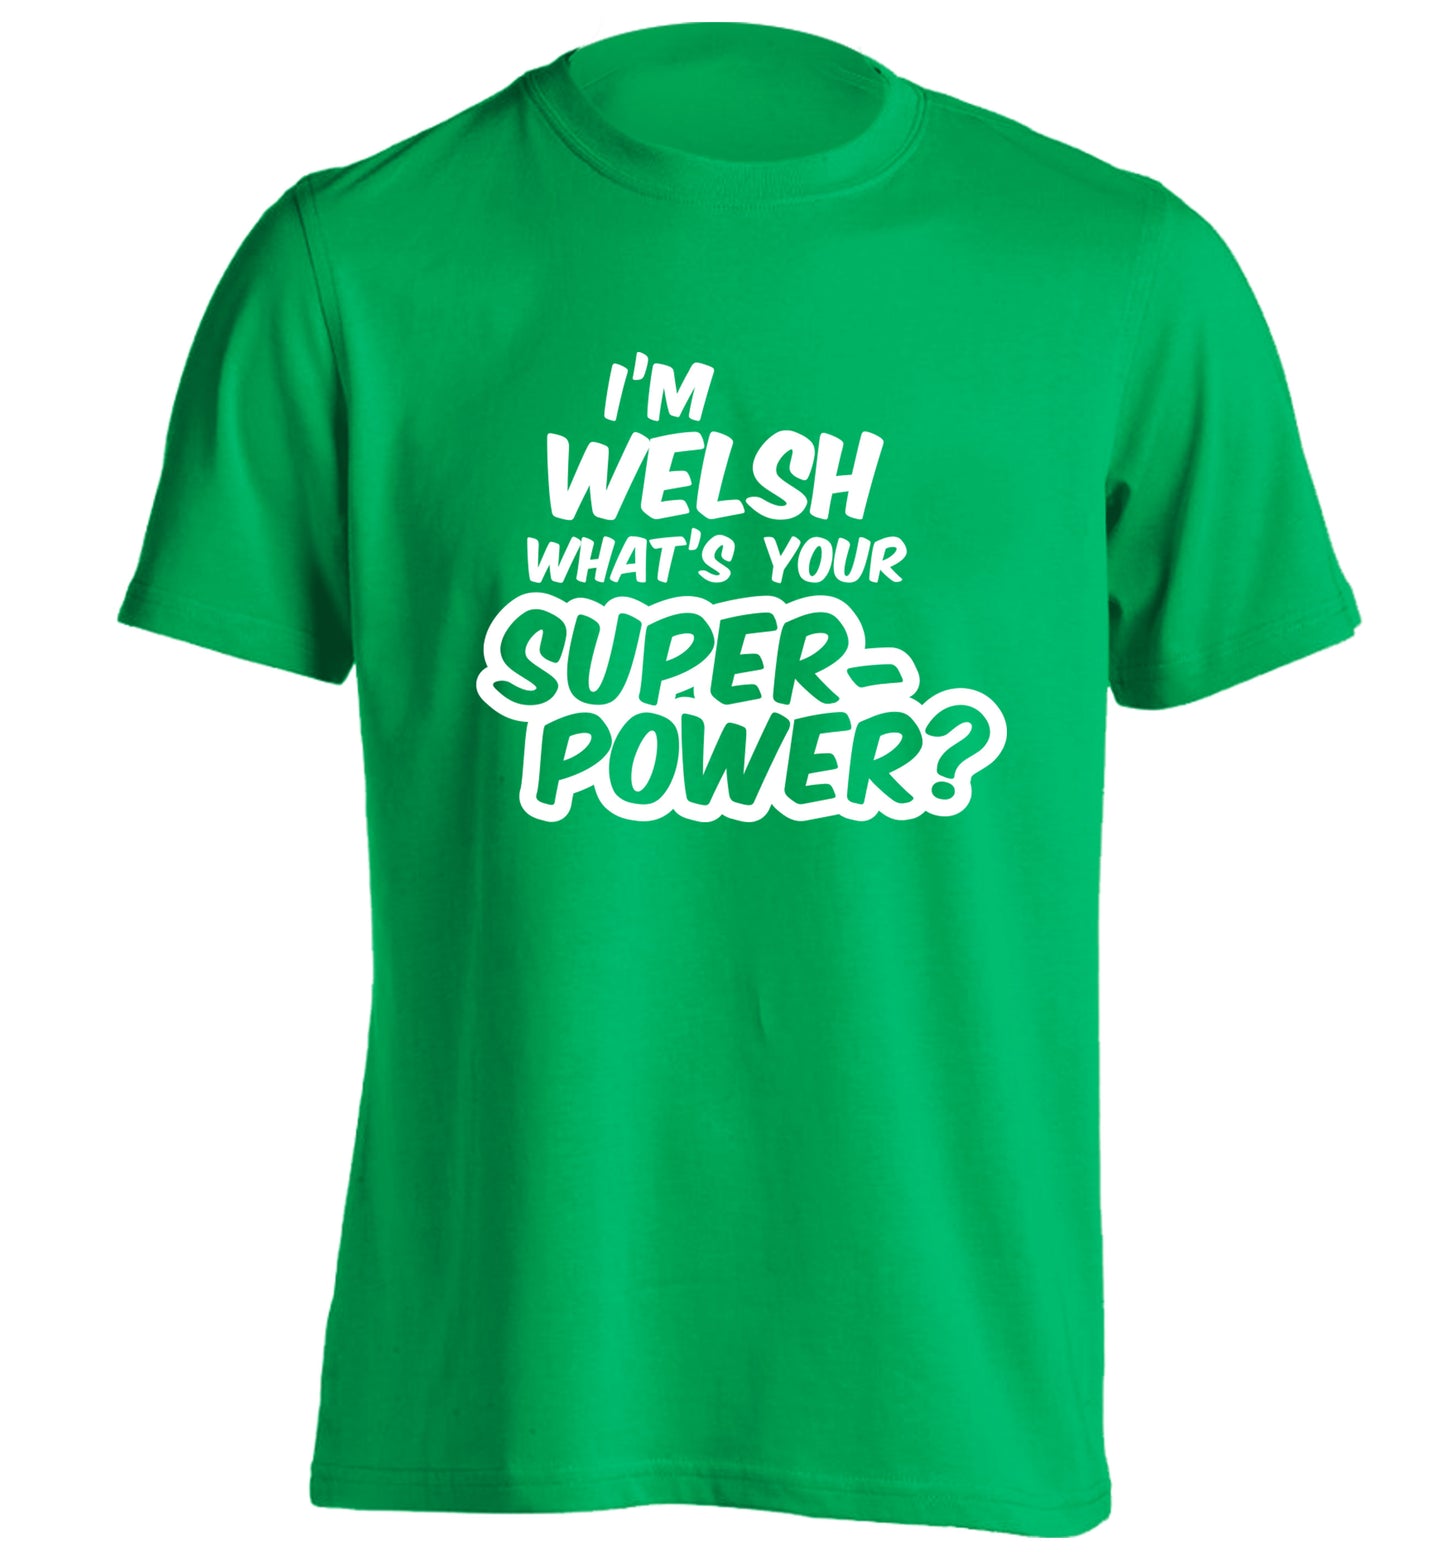 I'm Welsh what's your superpower? adults unisex green Tshirt 2XL